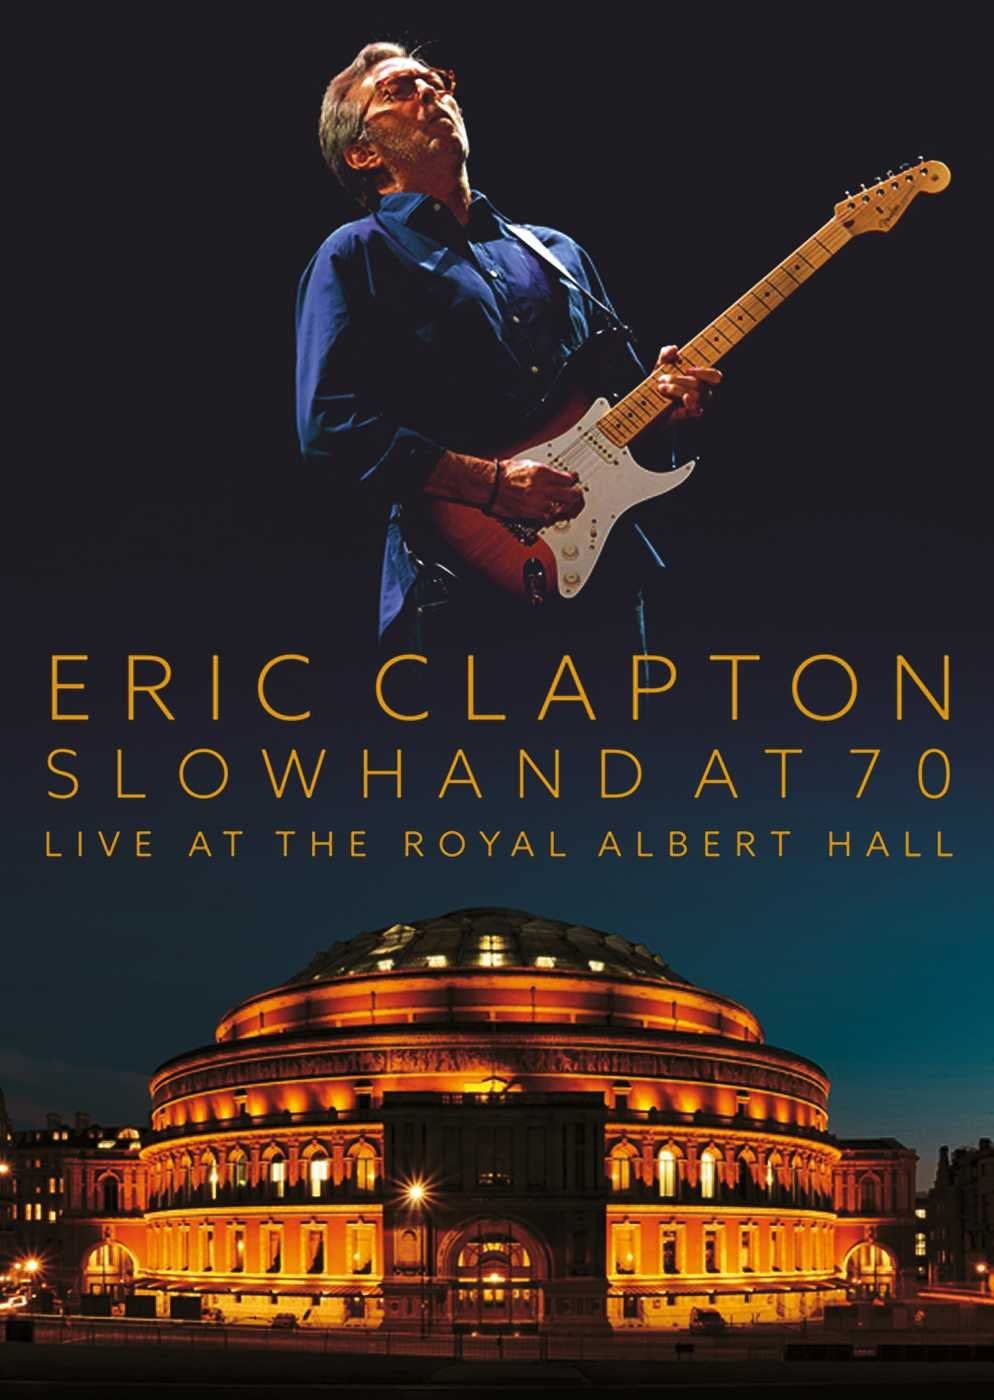 ERIC CLAPTON - Slowhand At 70 (blu-ray)